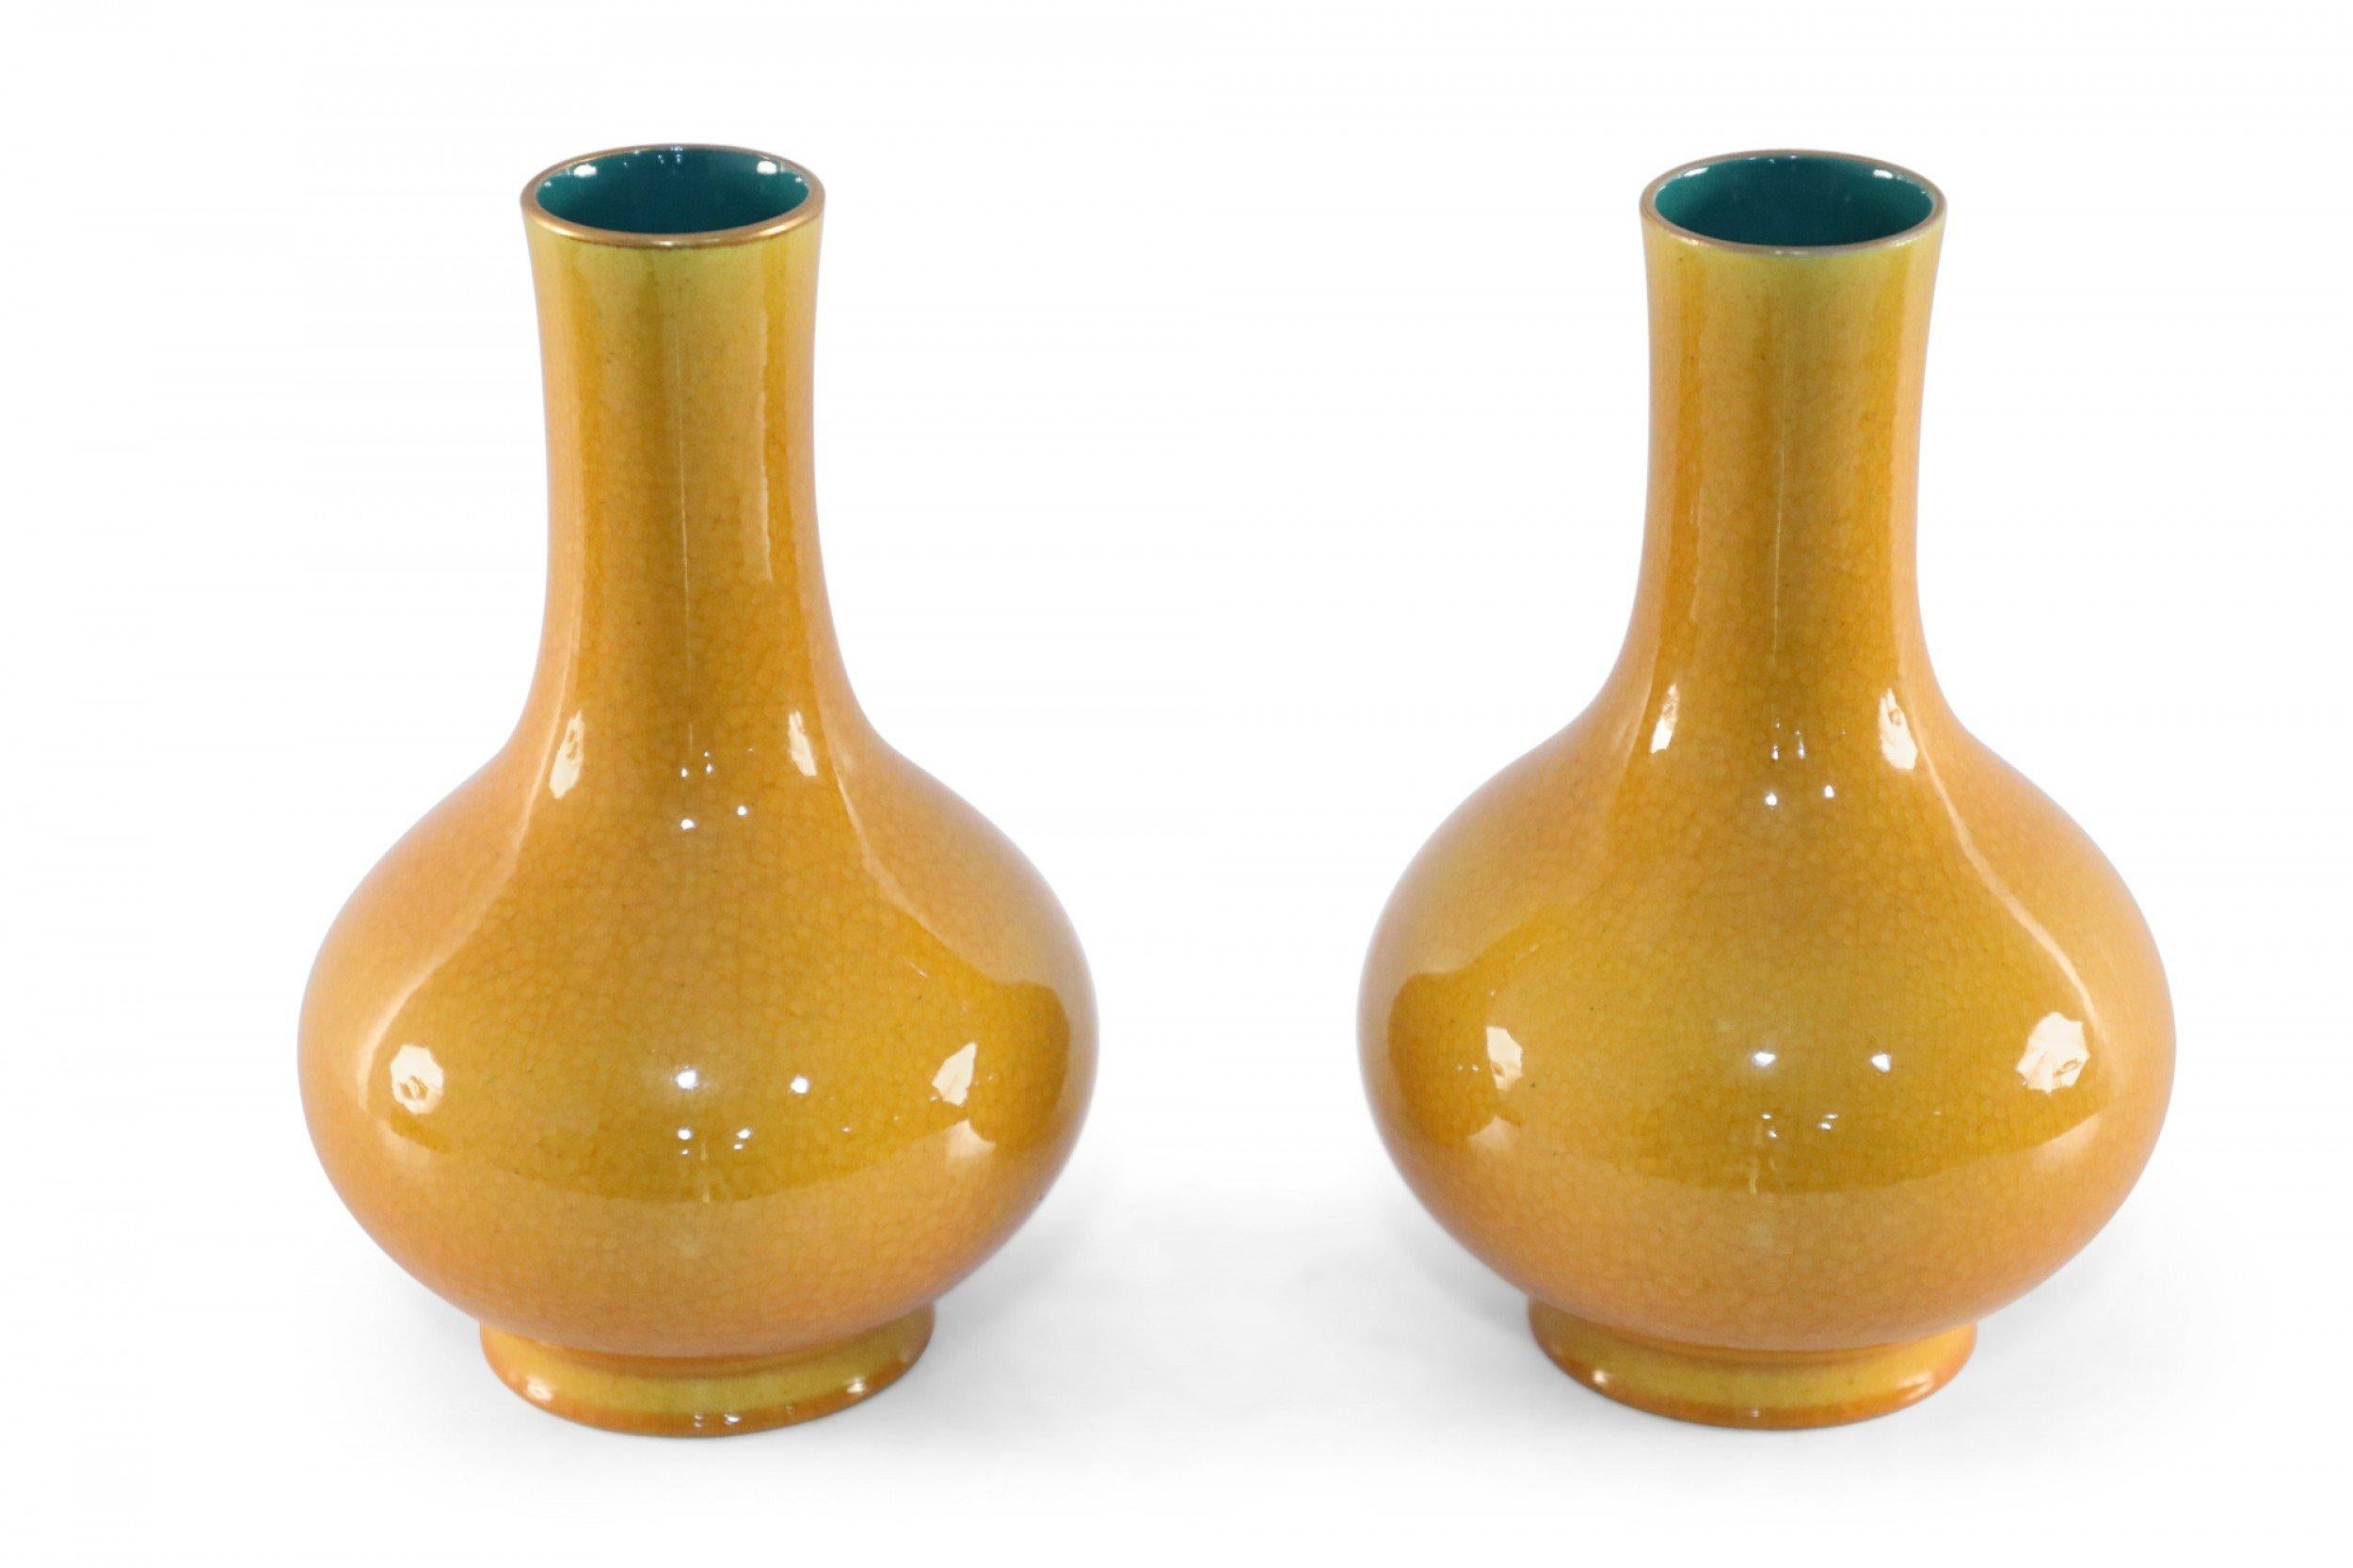 Pair of Chinese yellow, pear-shaped porcelain vases with crackled finishes, gold rims, and teal interiors (date mark on bottom, see photos) (priced as pair).
  